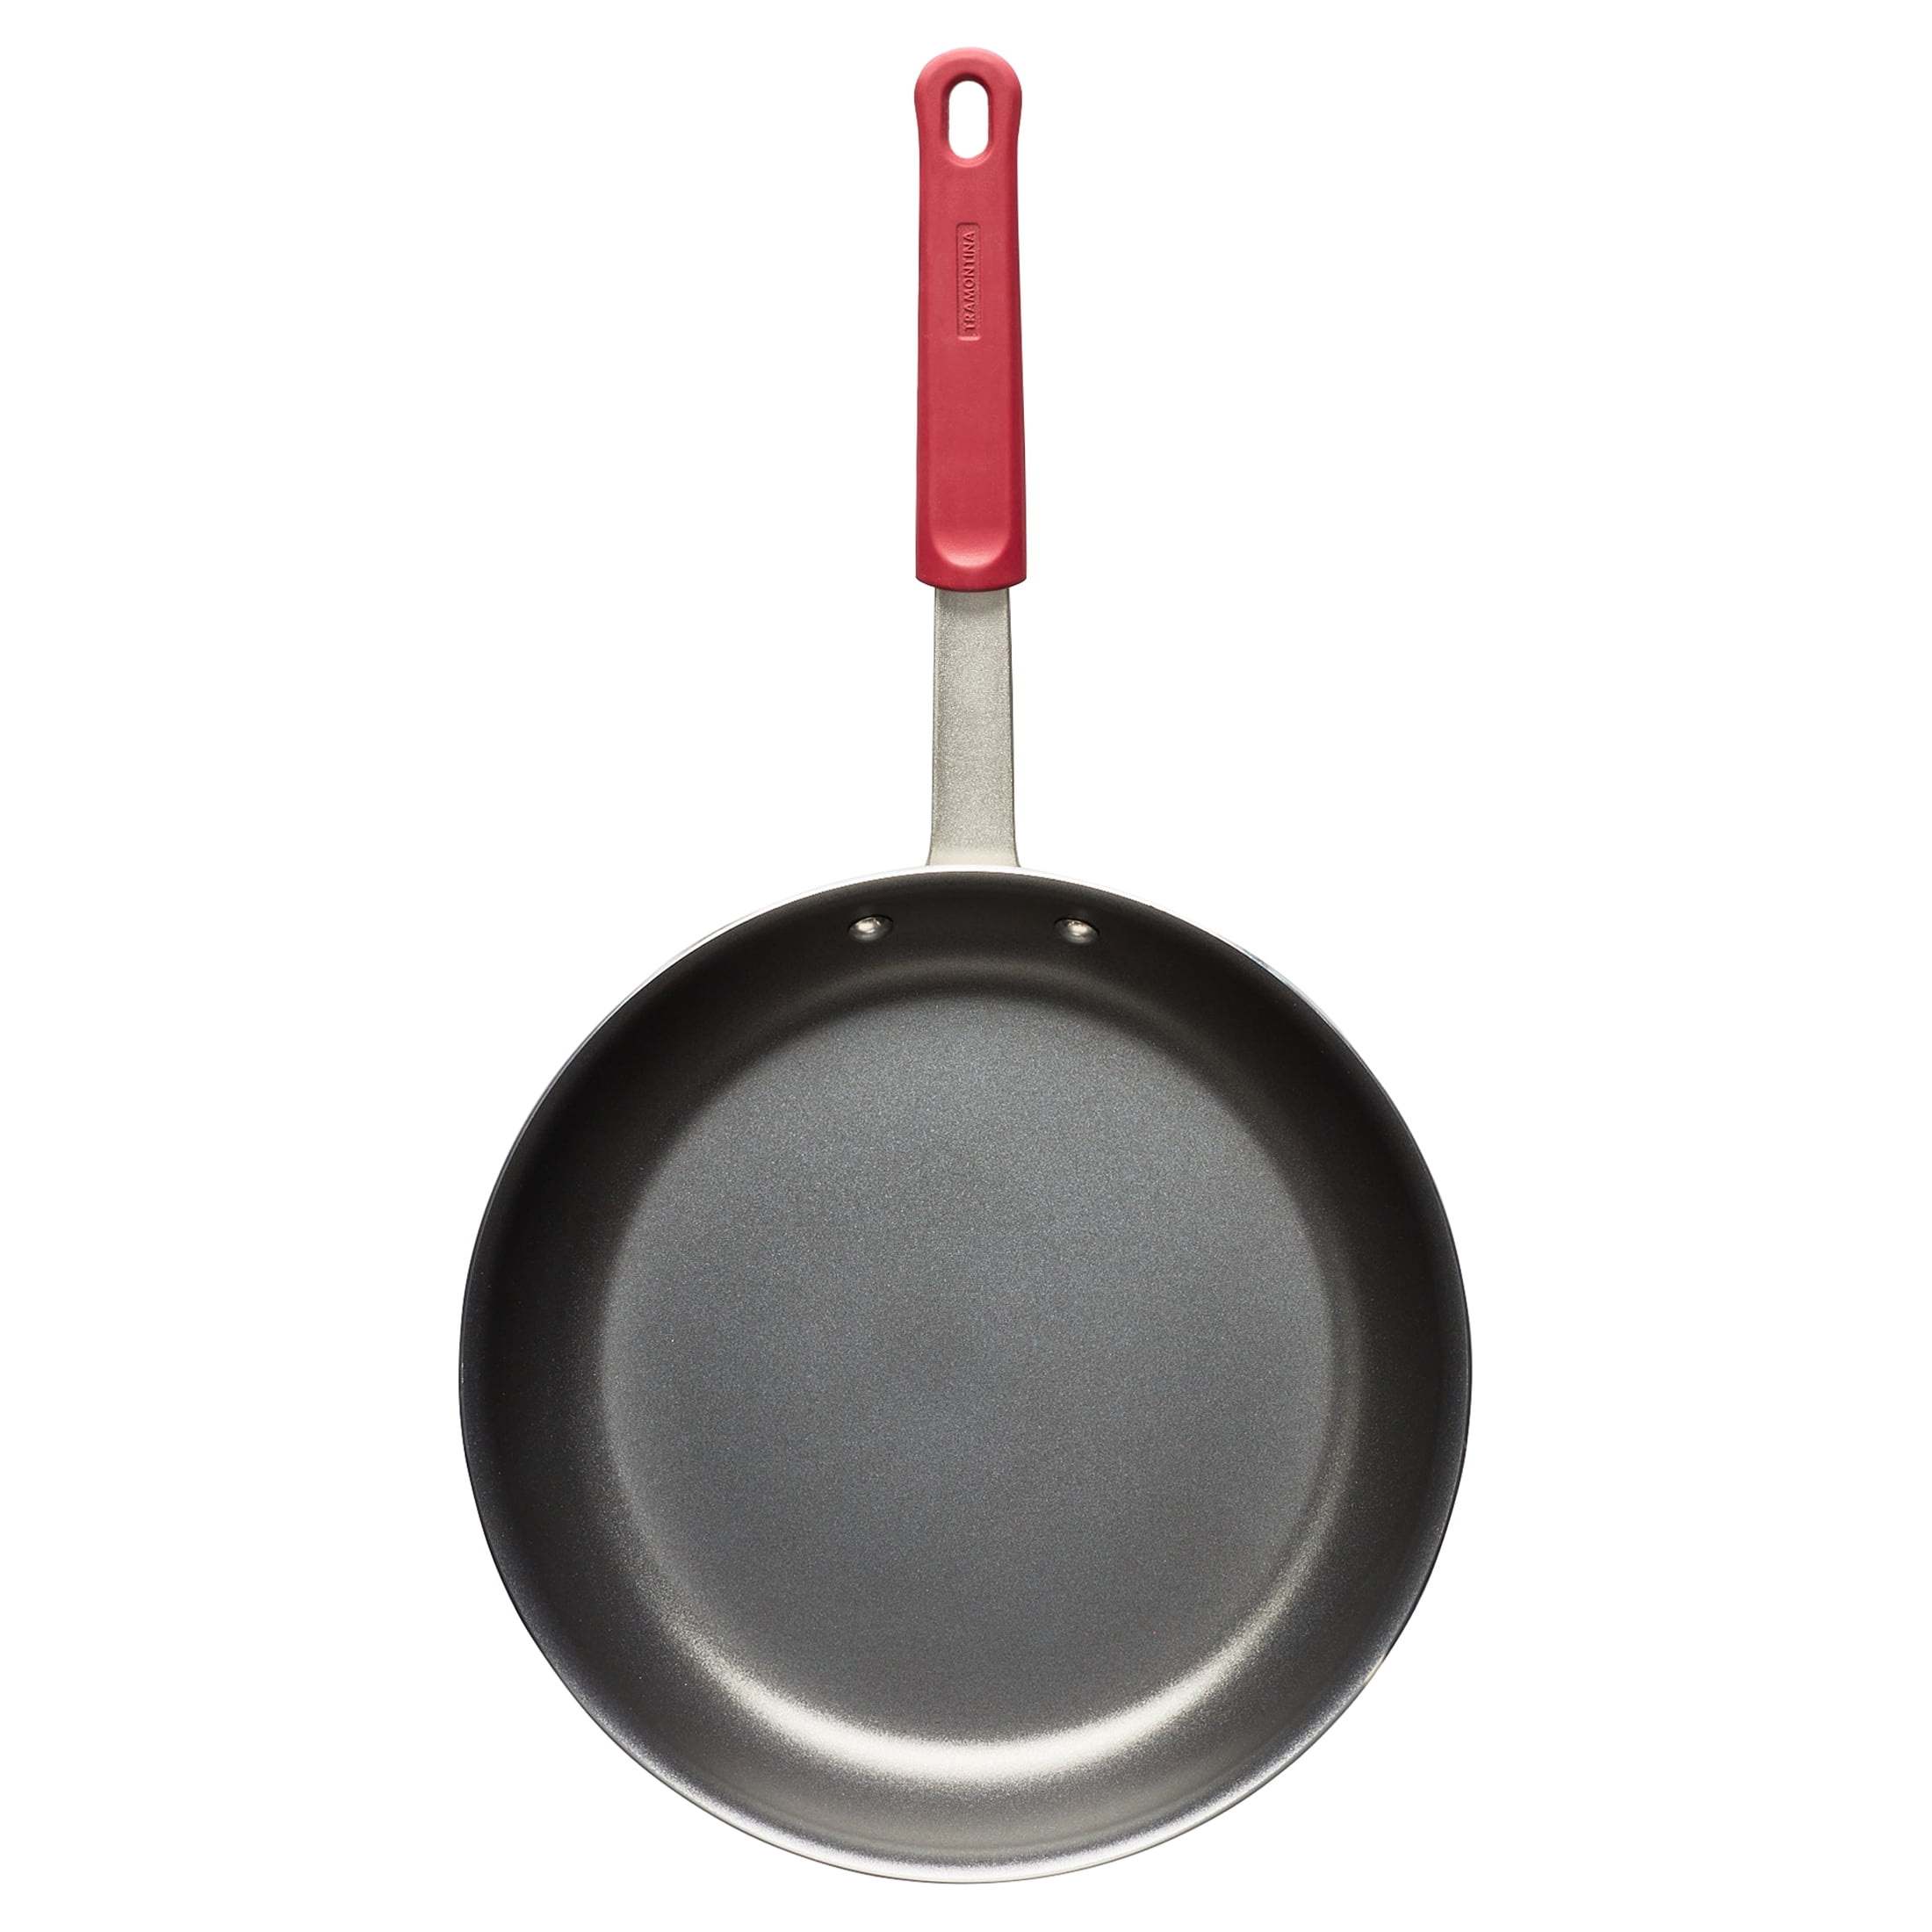  Tramontina Pro Line Commercial Grade Nonstick Fry Pans - 2 Pk:  Home & Kitchen